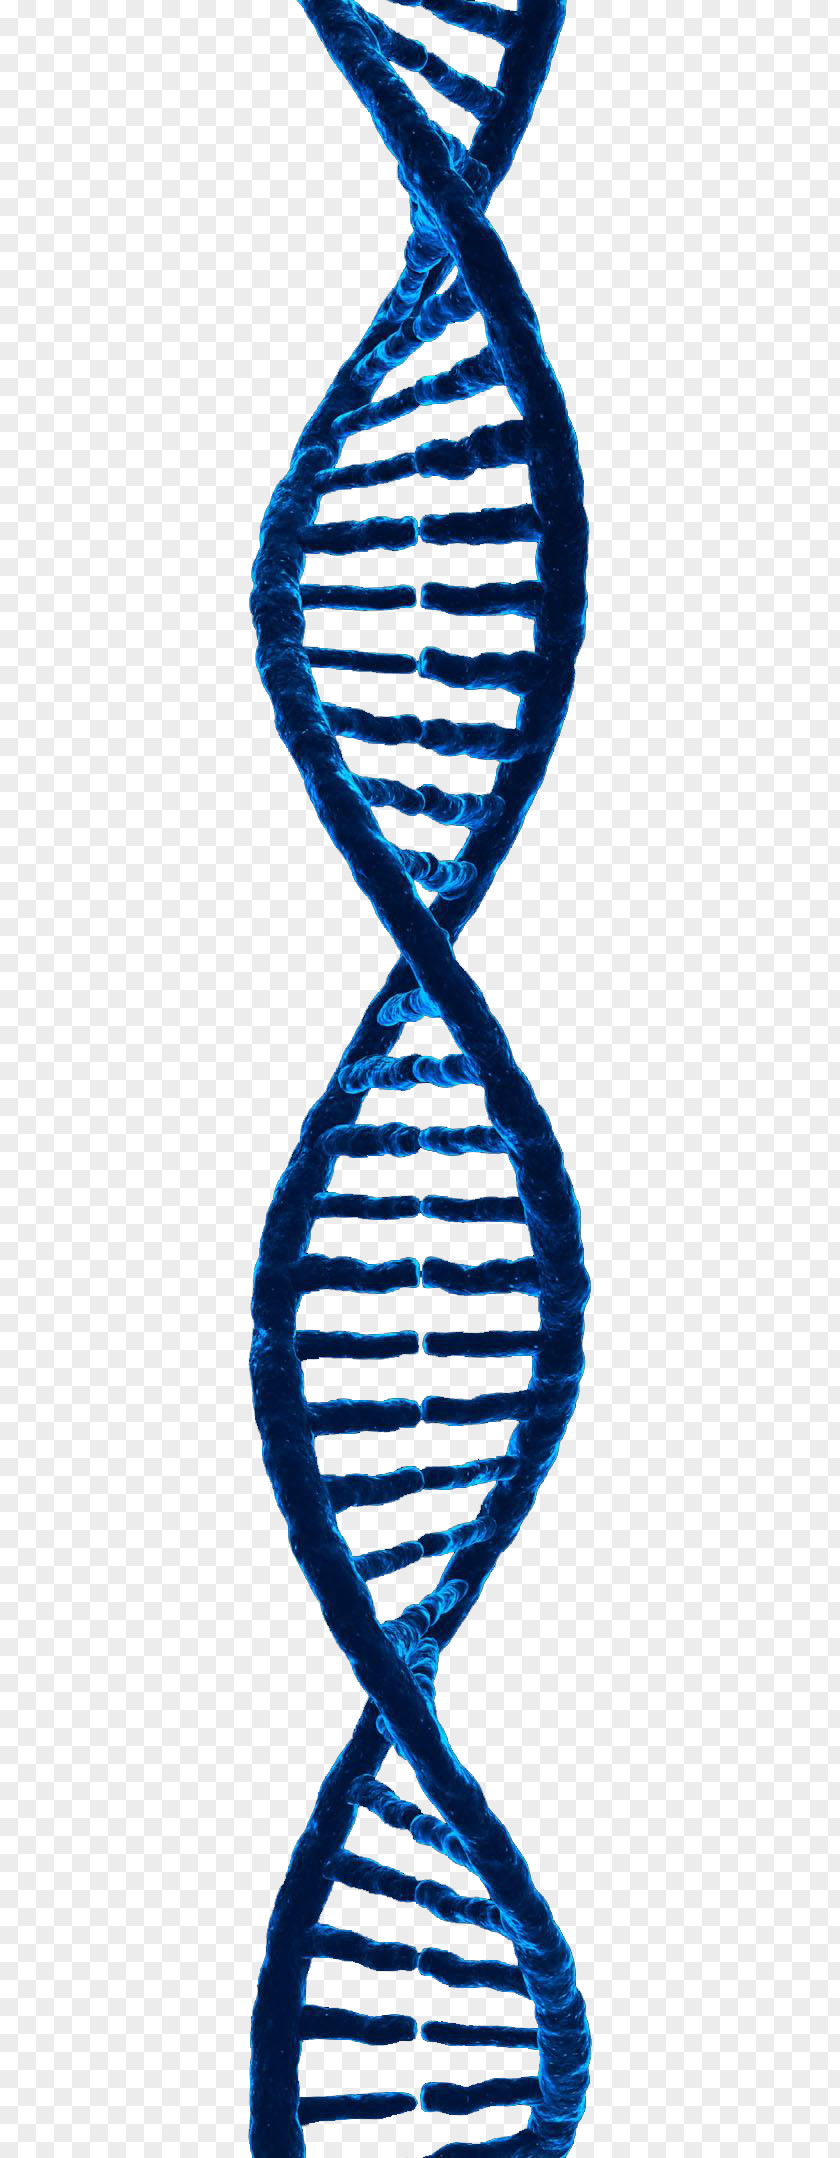 Free To Pull DNA Material 3D Rendering Computer Graphics PNG